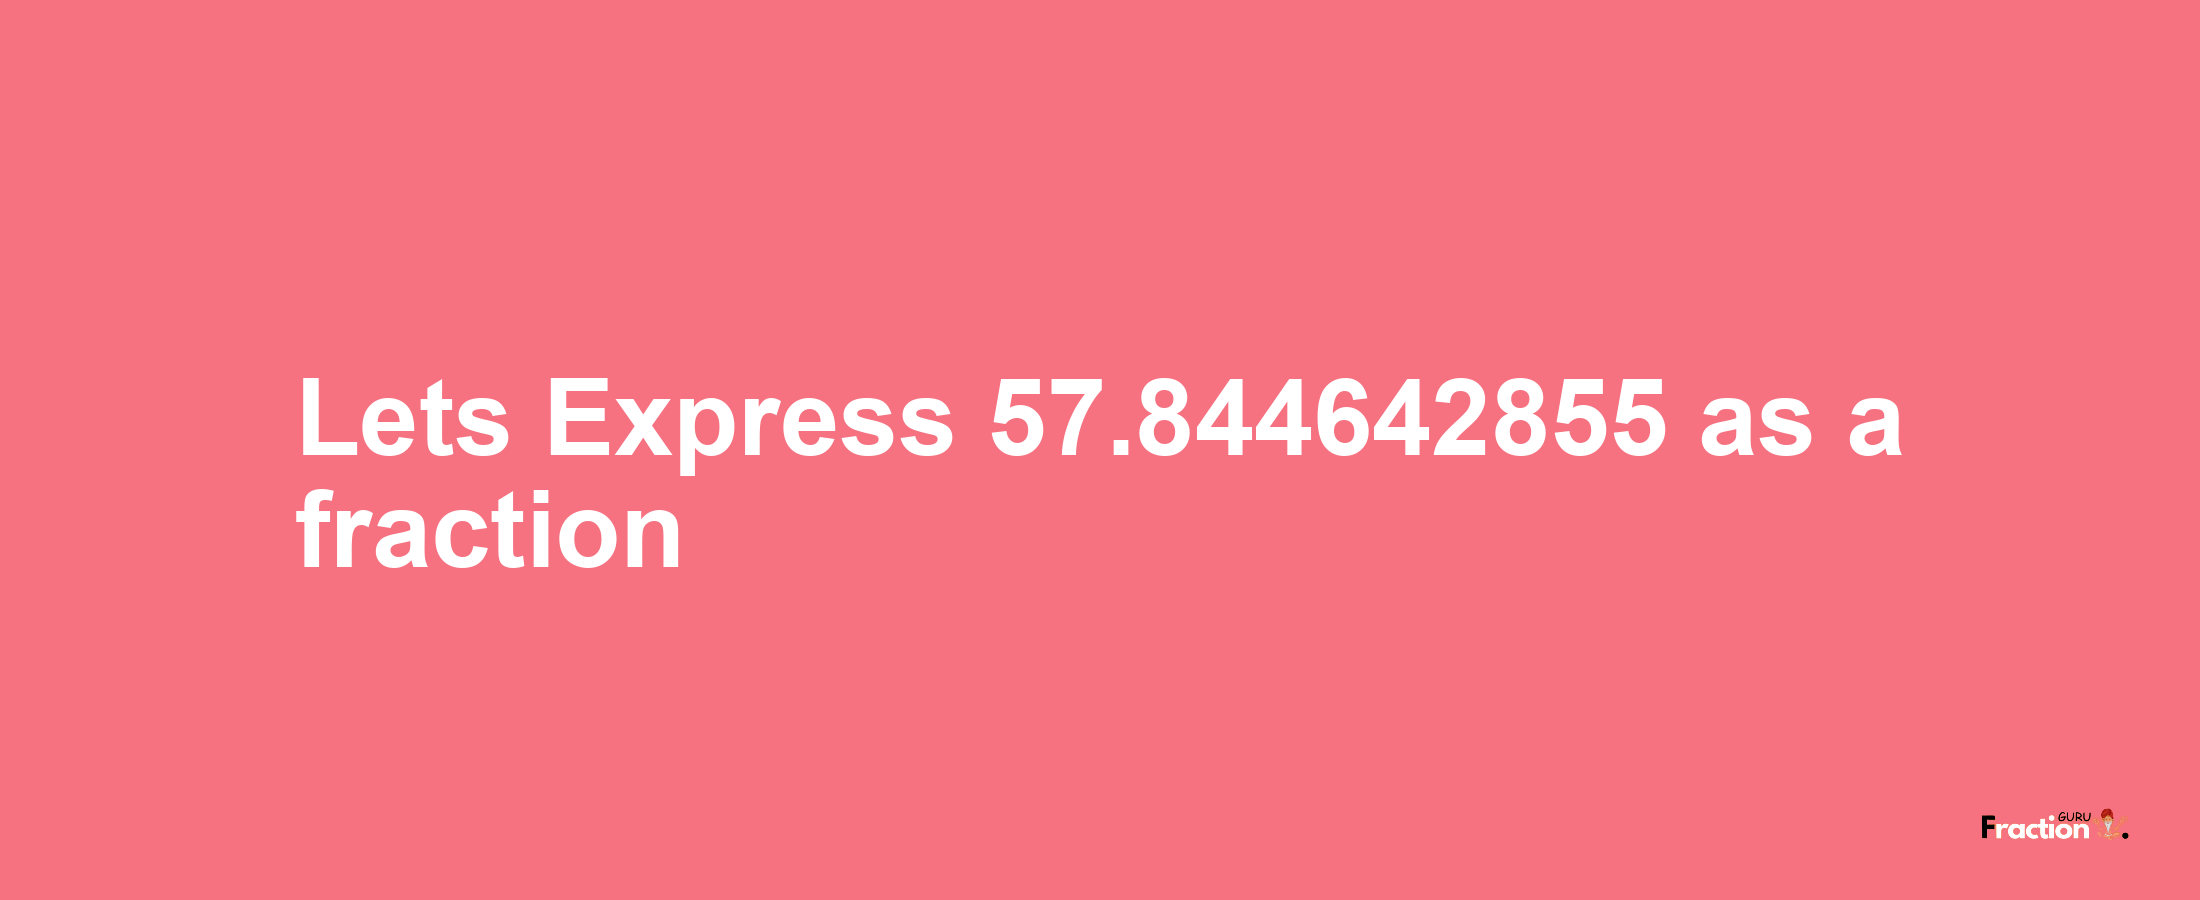 Lets Express 57.844642855 as afraction